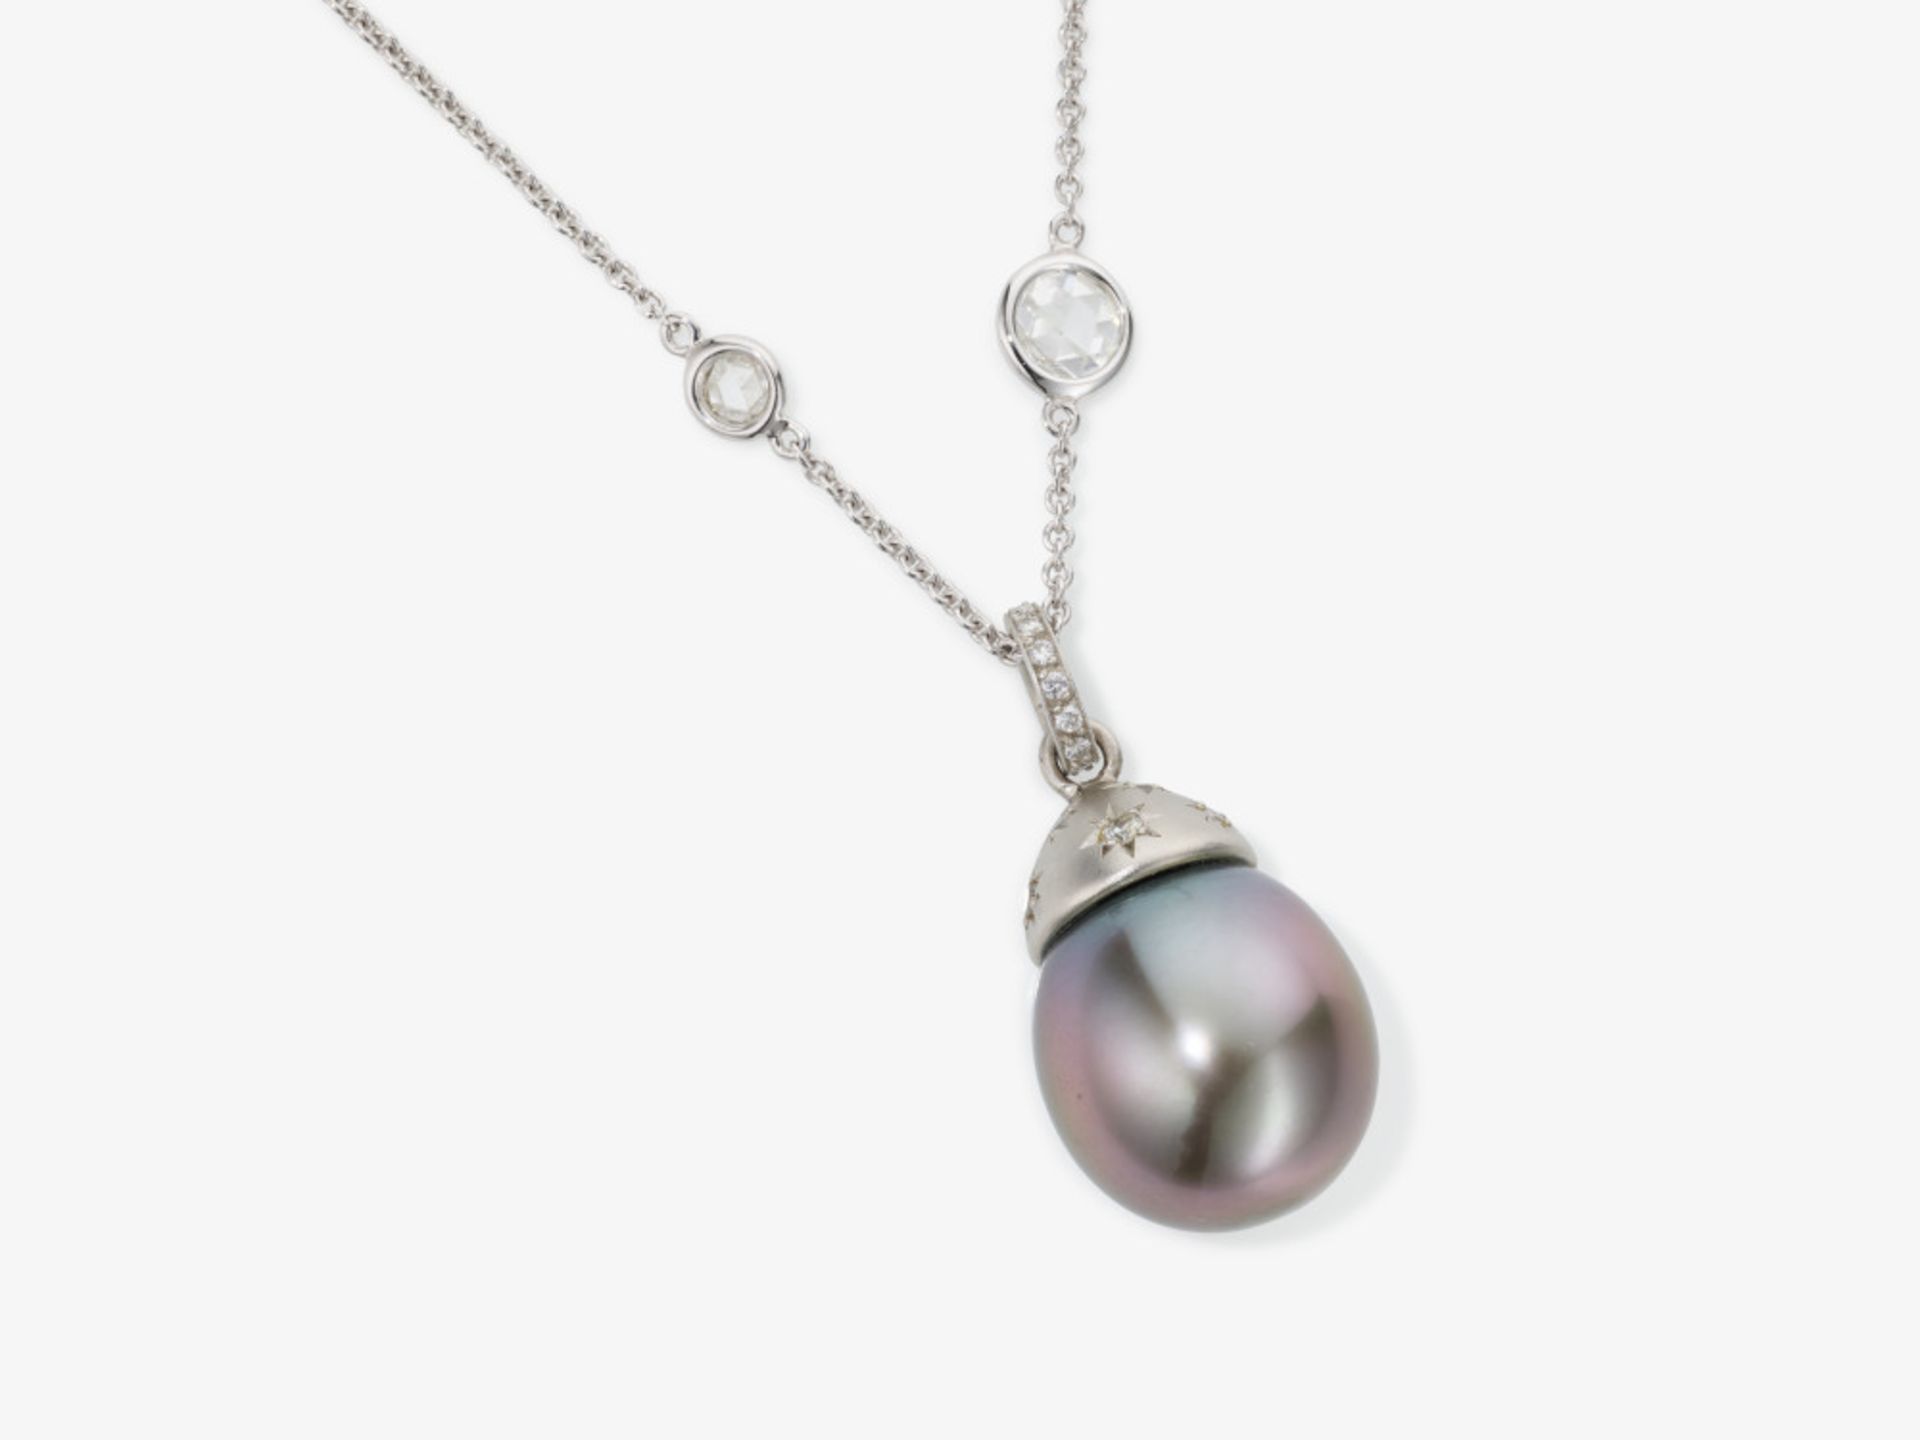 A delicate link chain necklace decorated with diamond roses and a South Sea Tahitian cultured pearl 